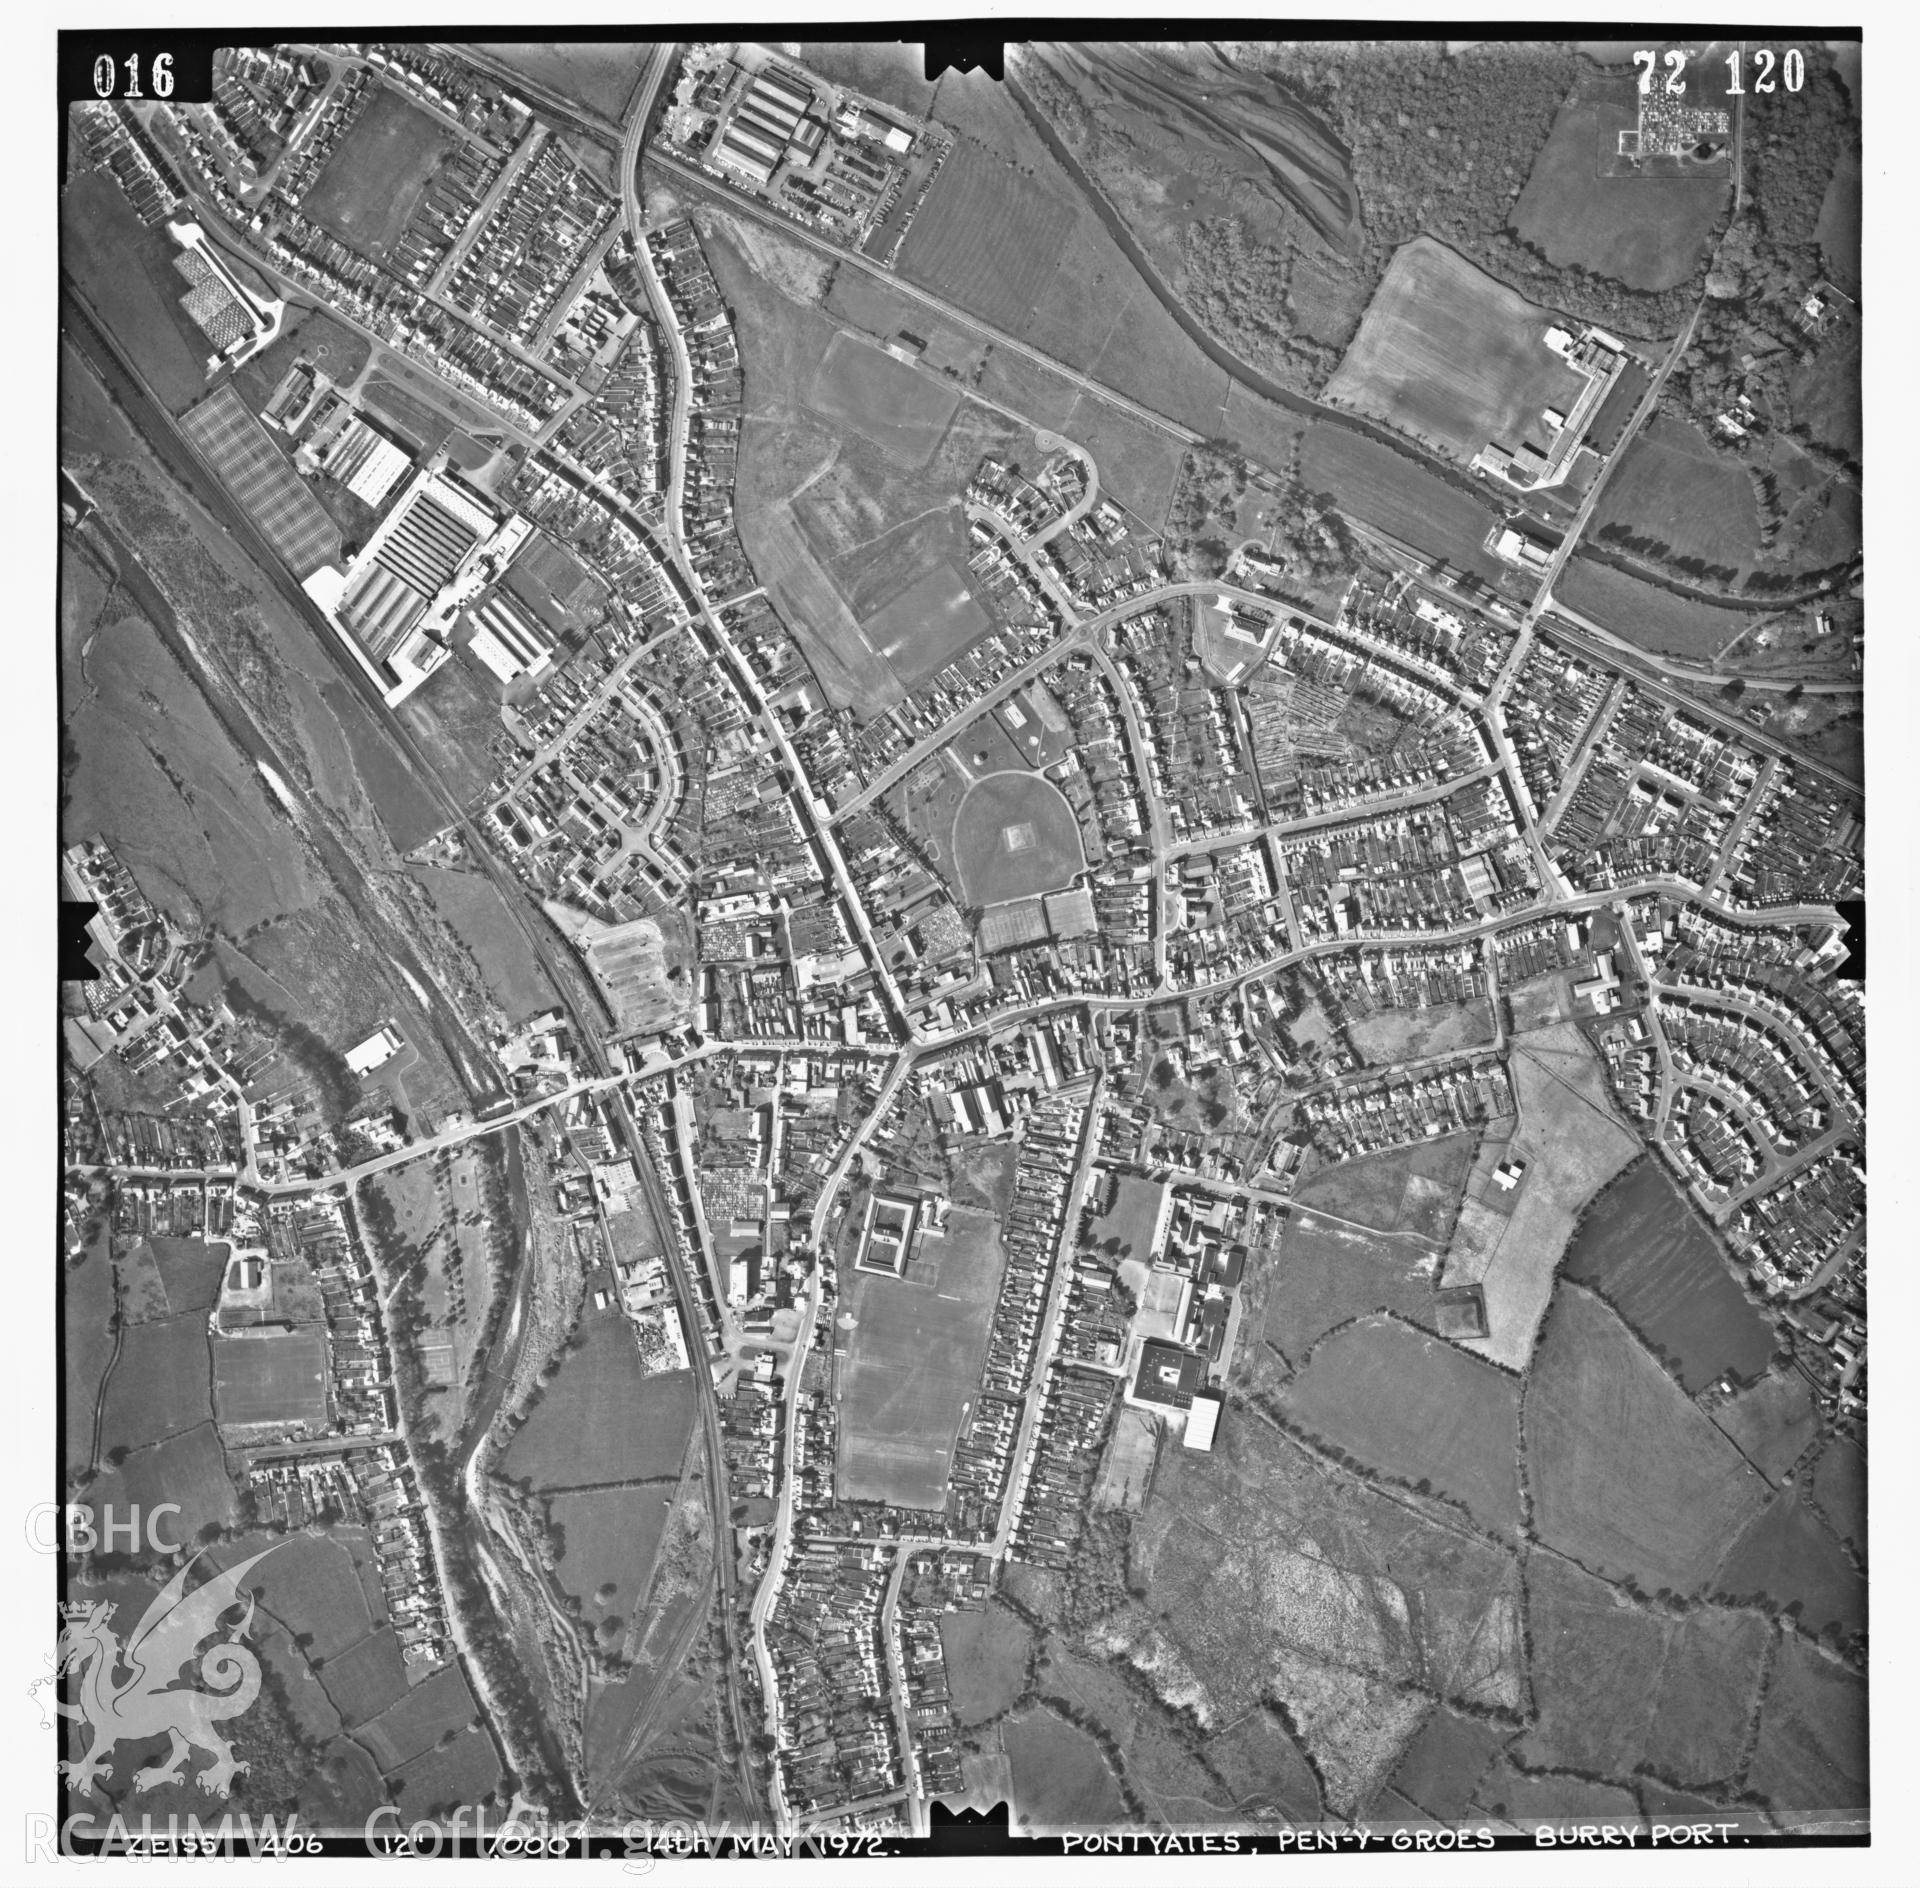 Digitized copy of an aerial photograph showing Ammanford area, taken by Ordnance Survey, 1972.